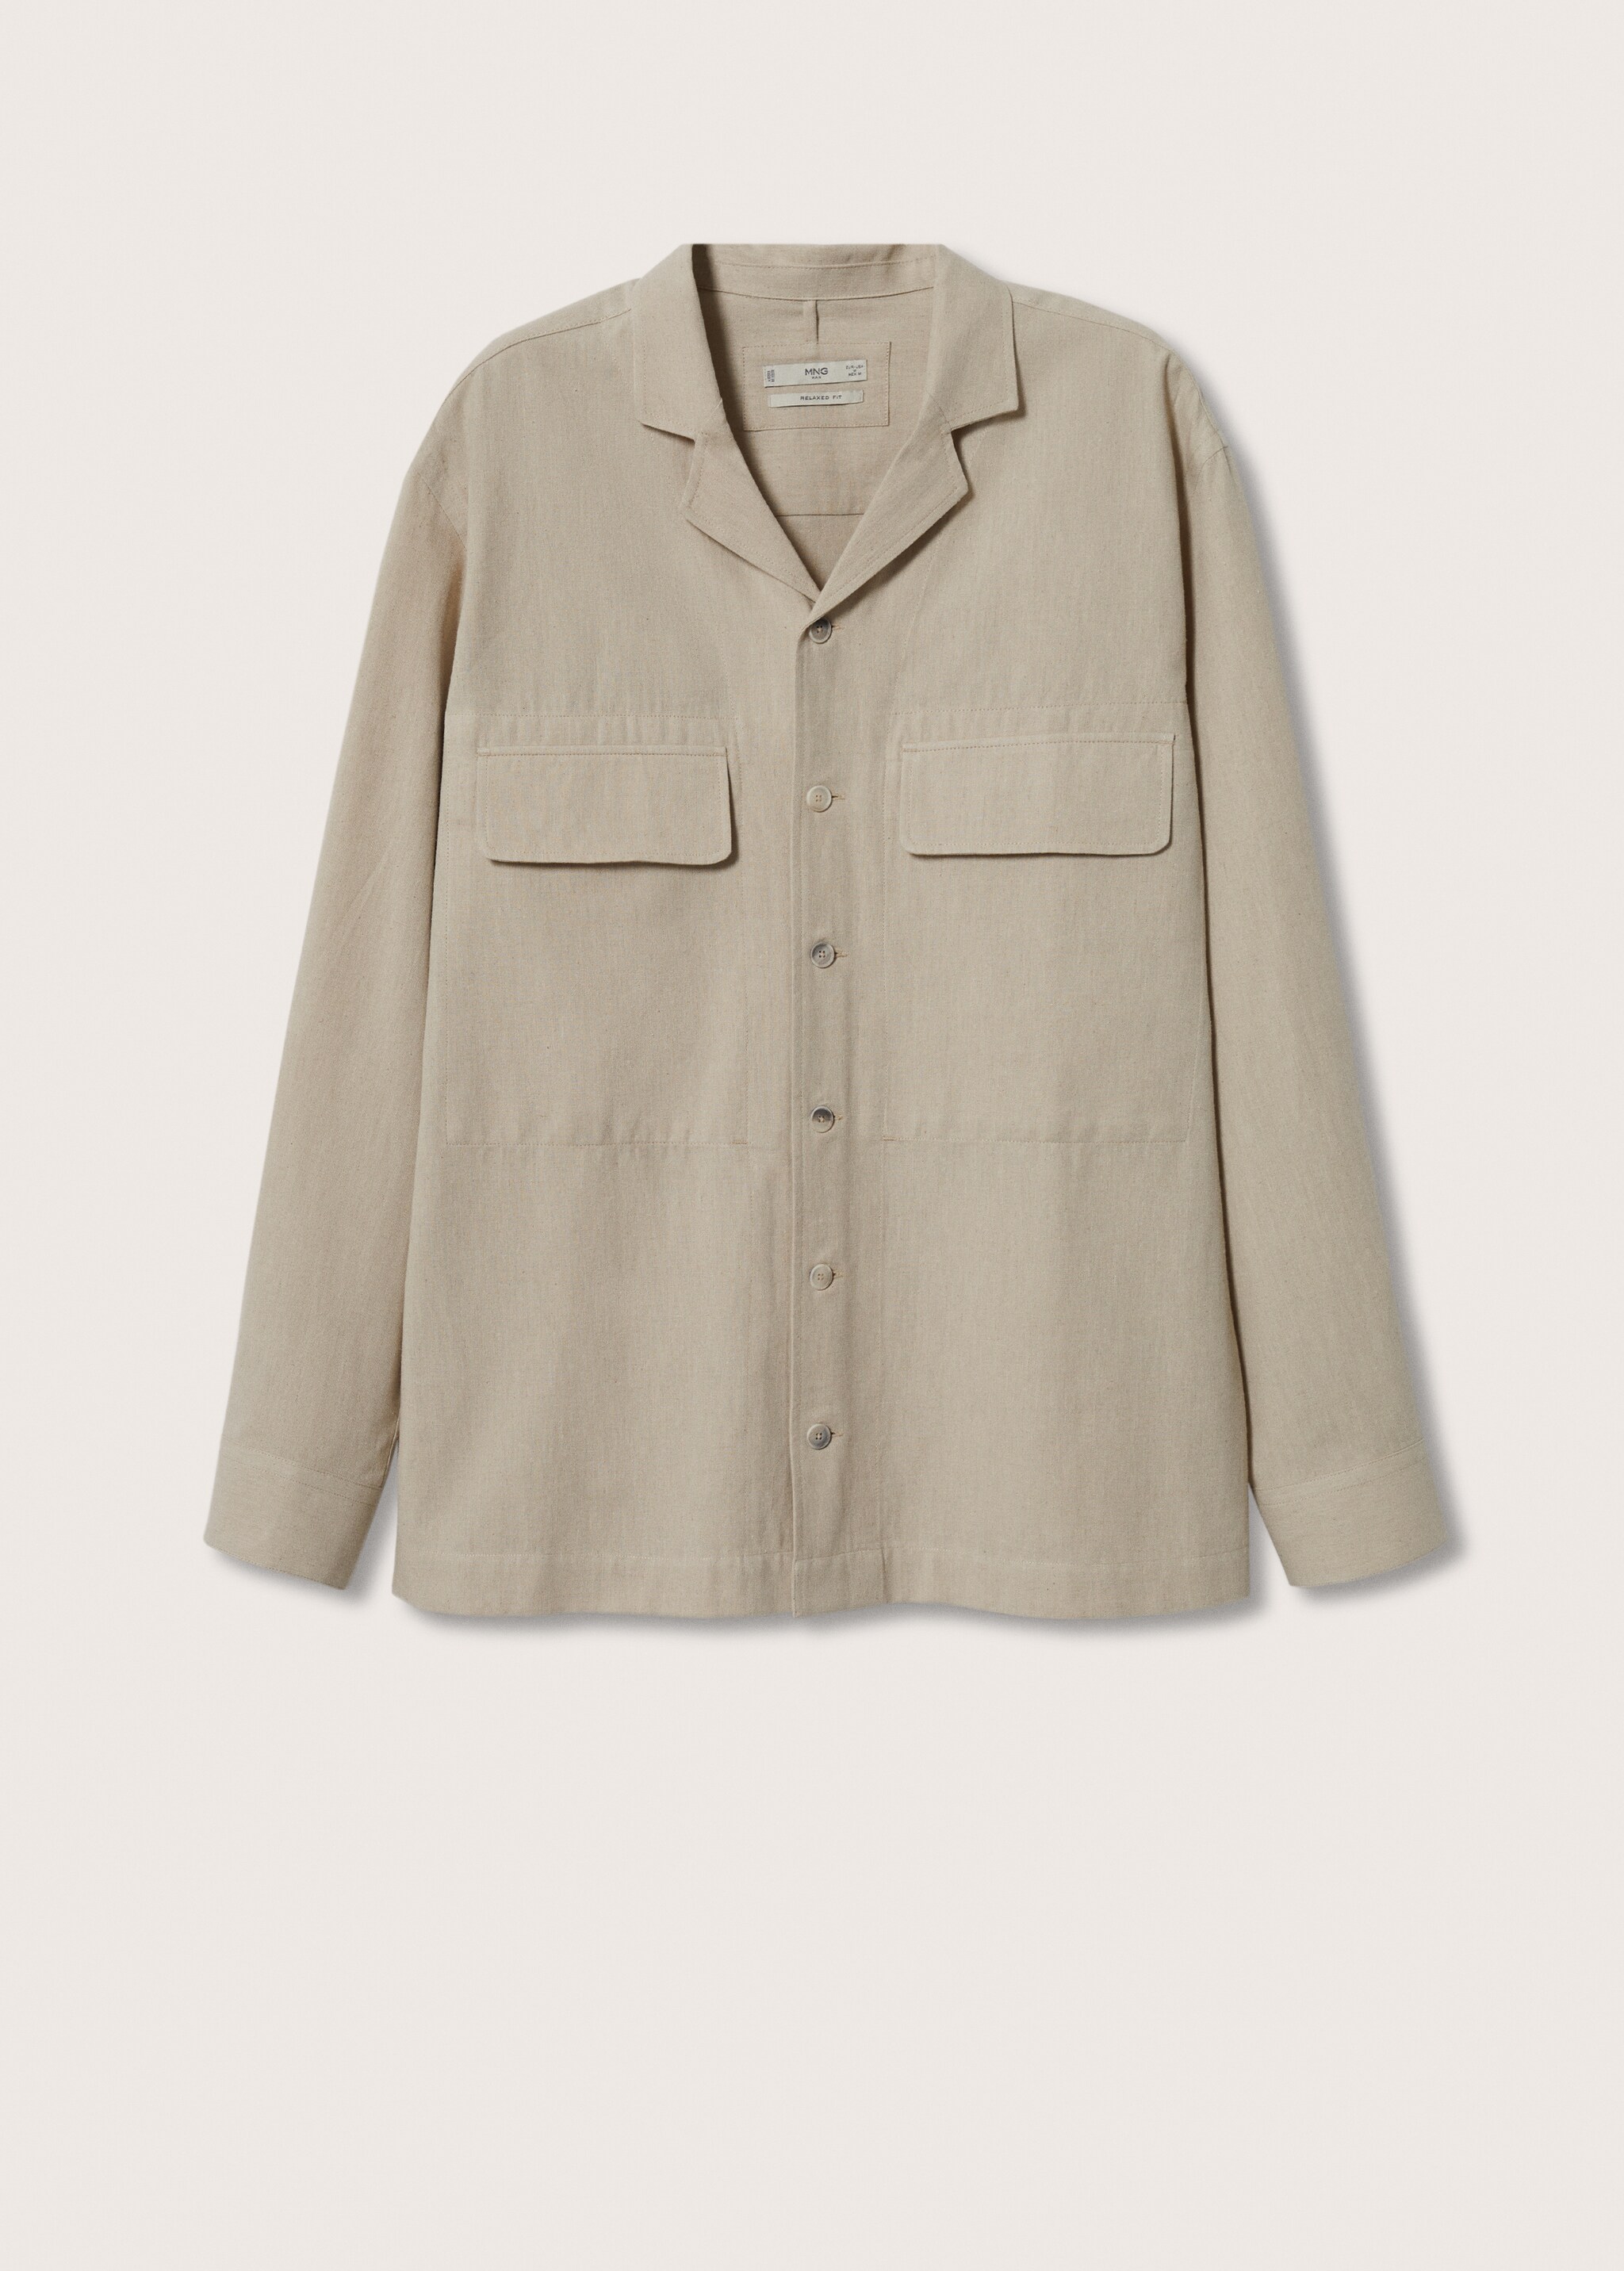 Linen cotton bowling overshirt - Article without model